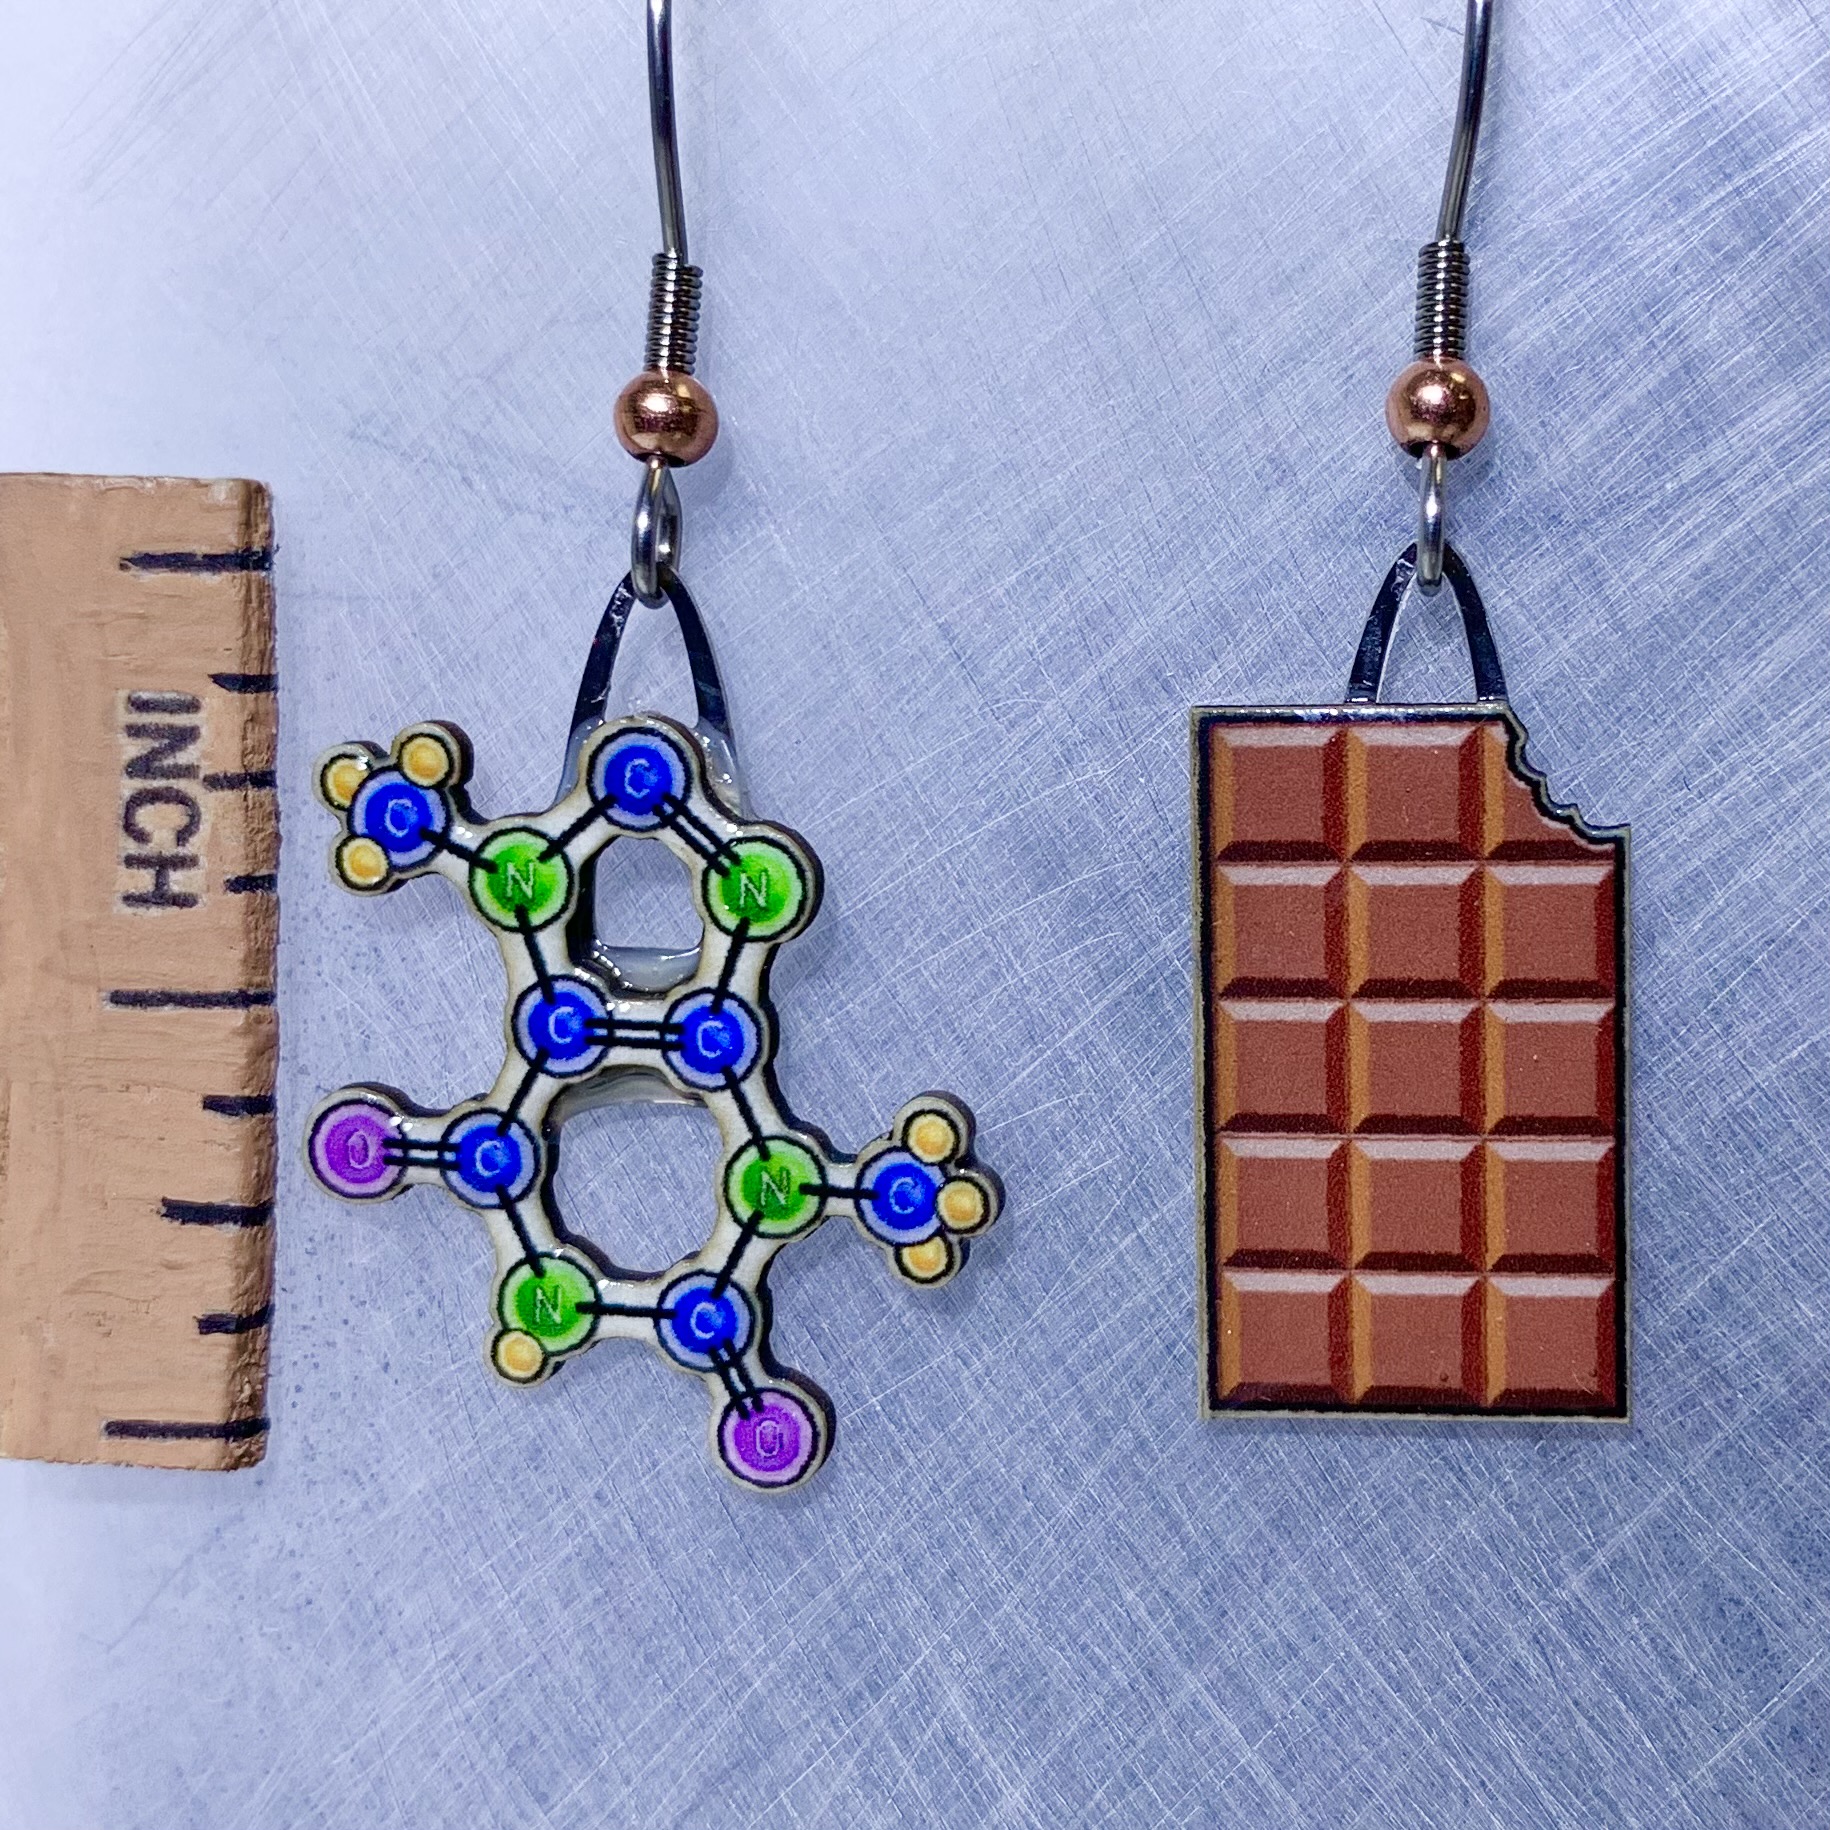 Picture shown is of 1 inch tall pair of earrings of Chocolate Molecule & Chocolate Bar.